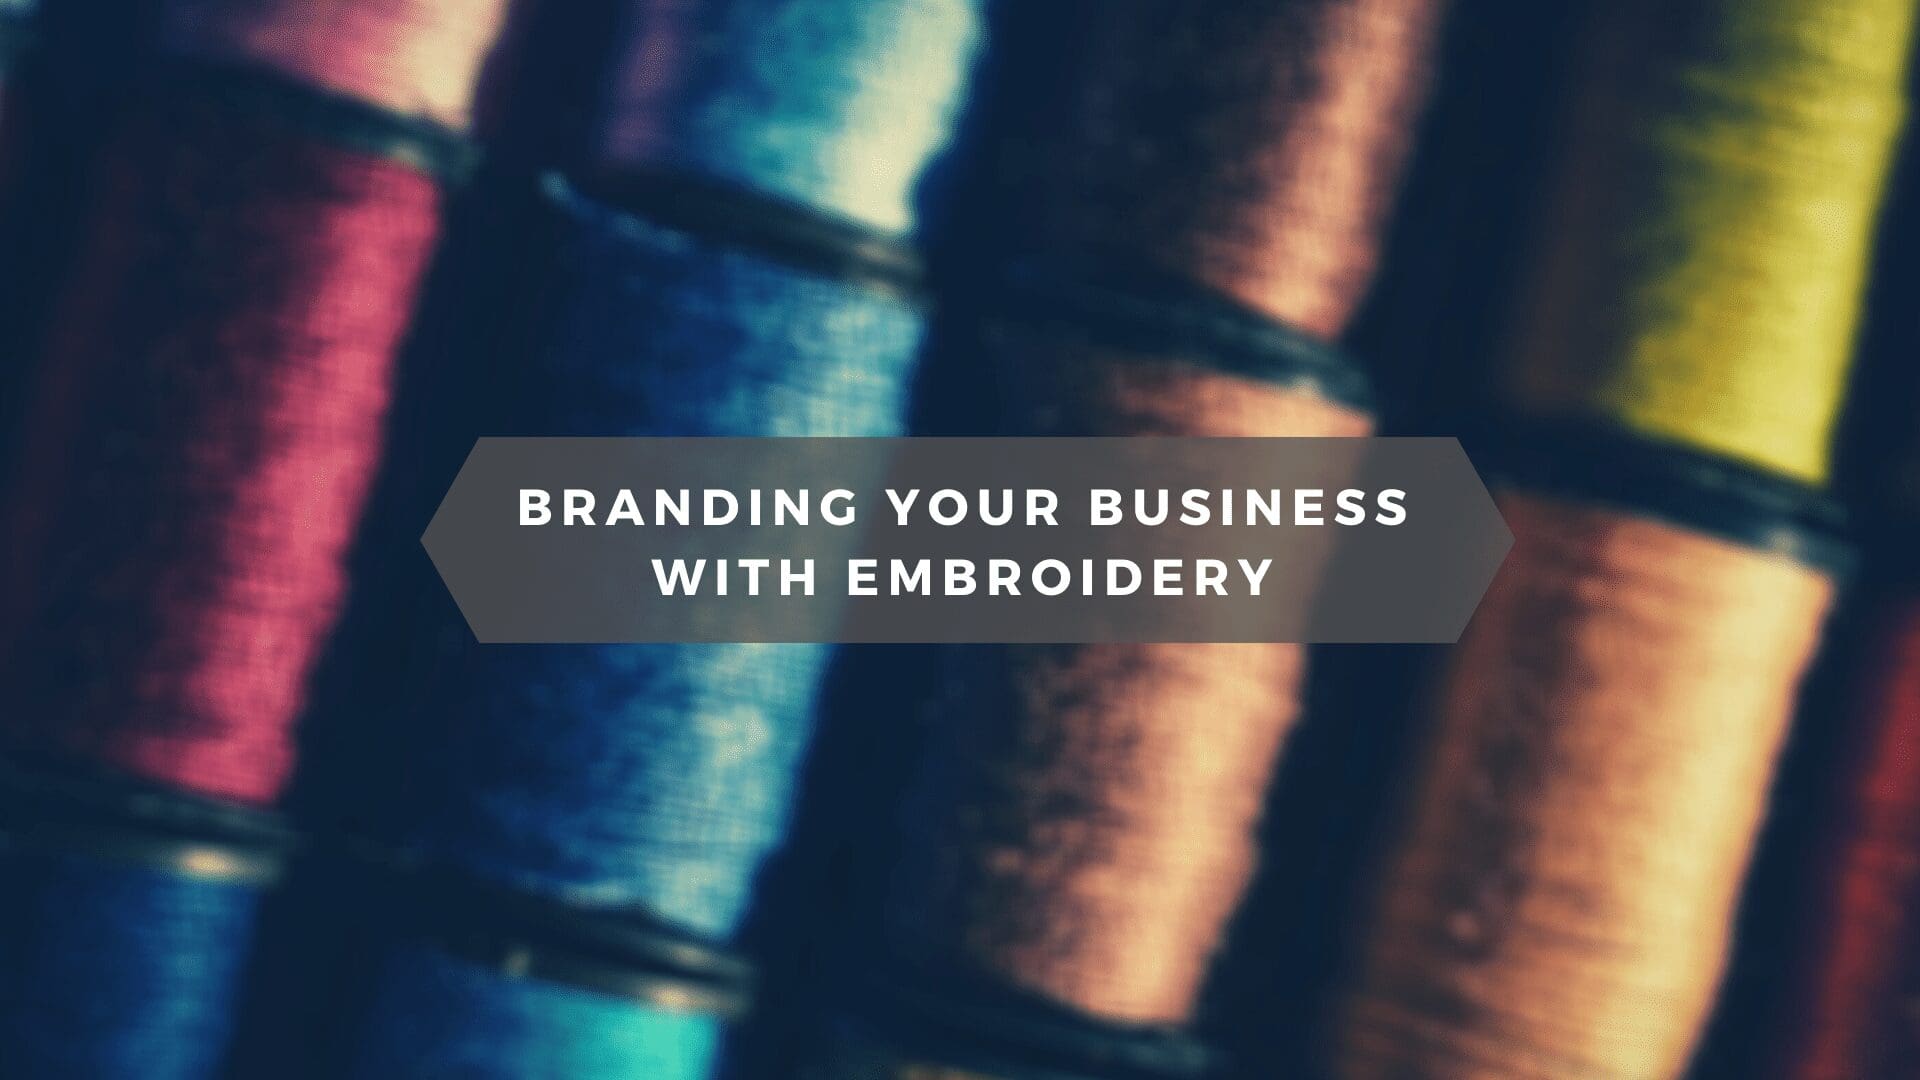 Branding Your Business With Embroidery